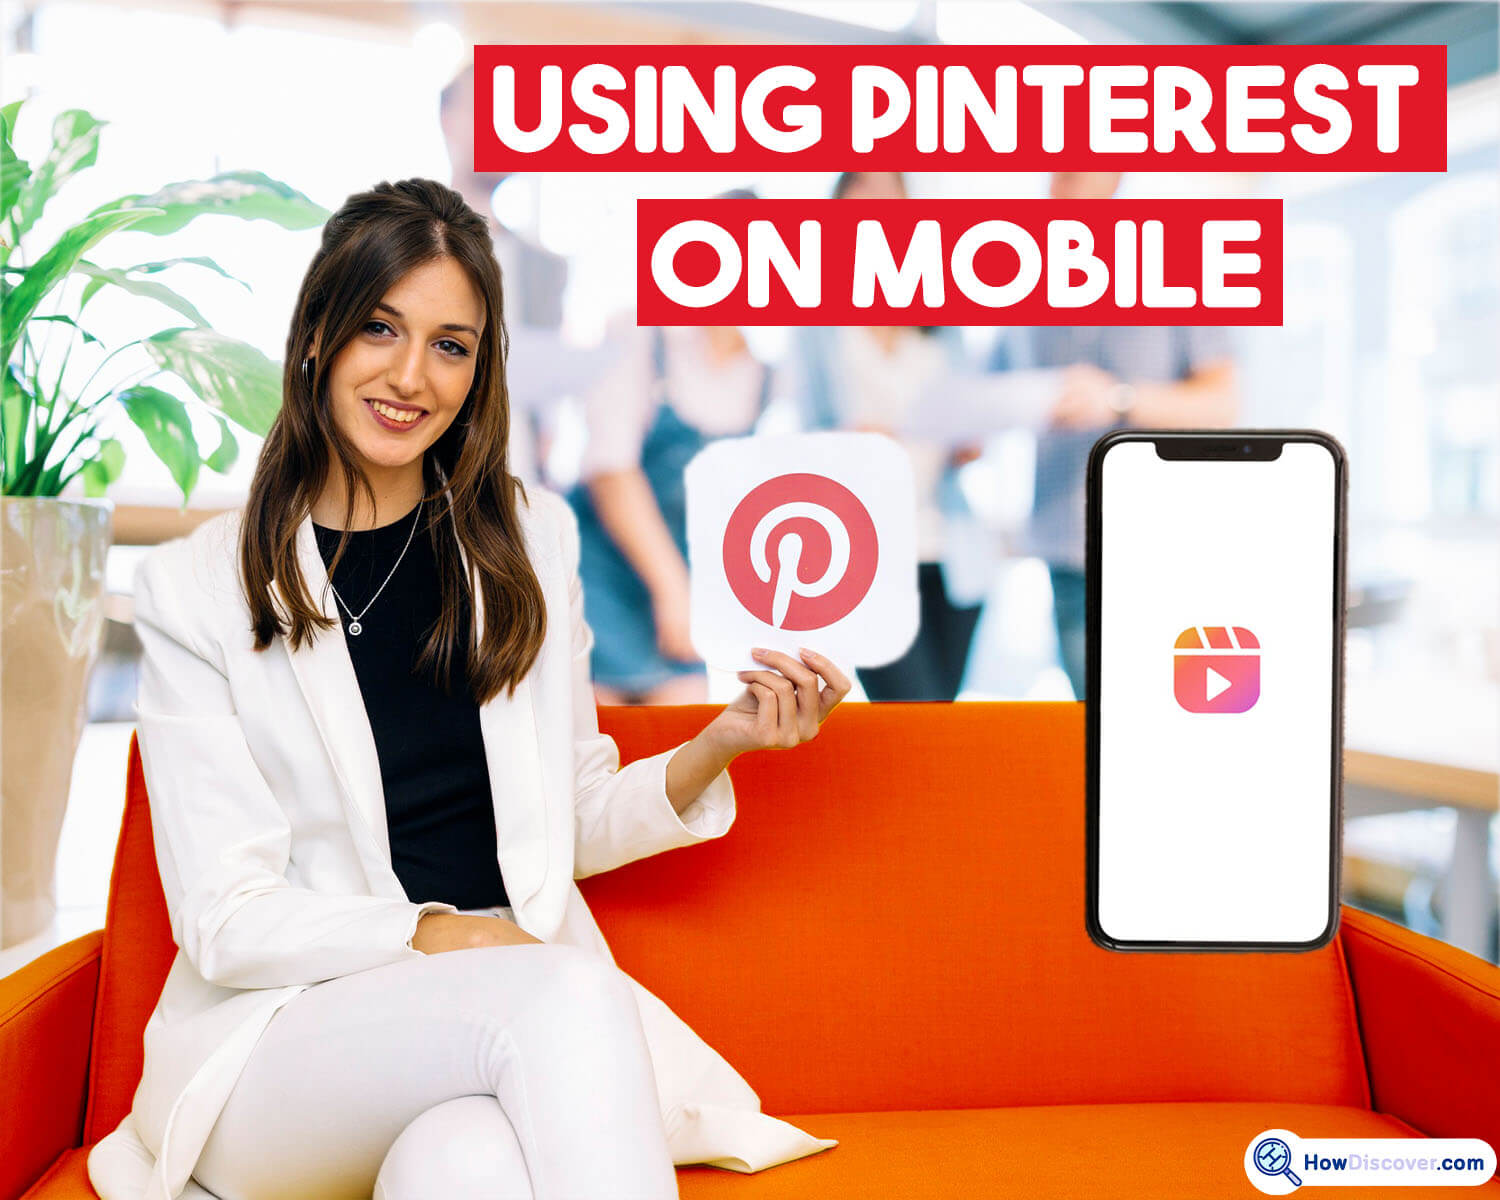 How To Use Pinterest - Using Pinterest on mobile